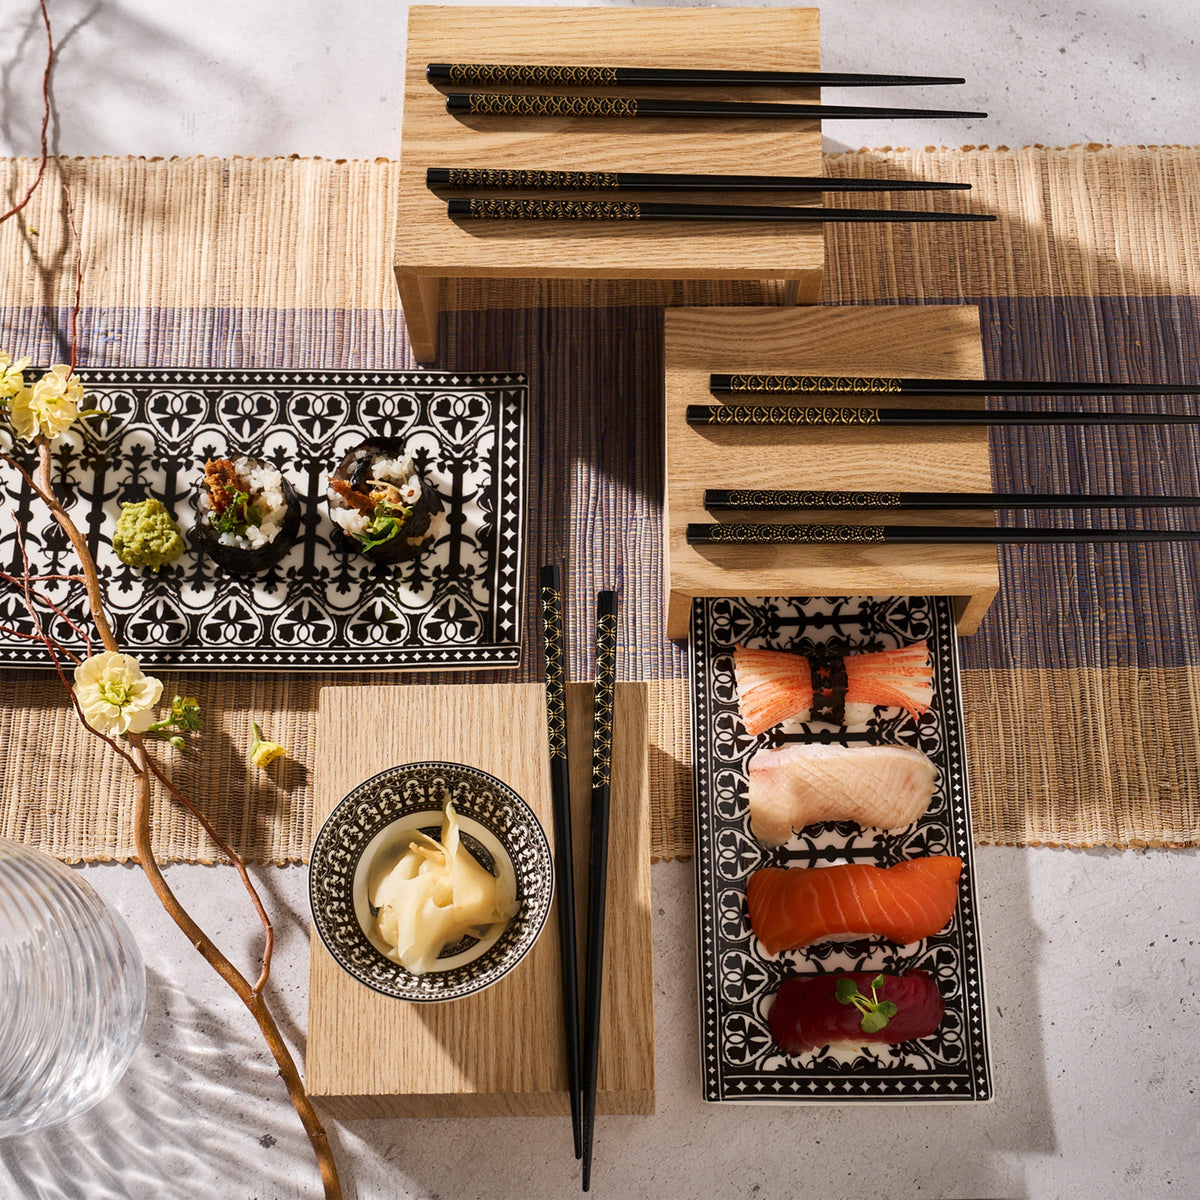 Japanese cuisine spread with sushi, sashimi, and pickled ginger on patterned plates and a Caskata Casablanca Large Sushi Tray, accompanied by wooden chopsticks, all set on a woven mat. Flowers and a glass of water are also visible.